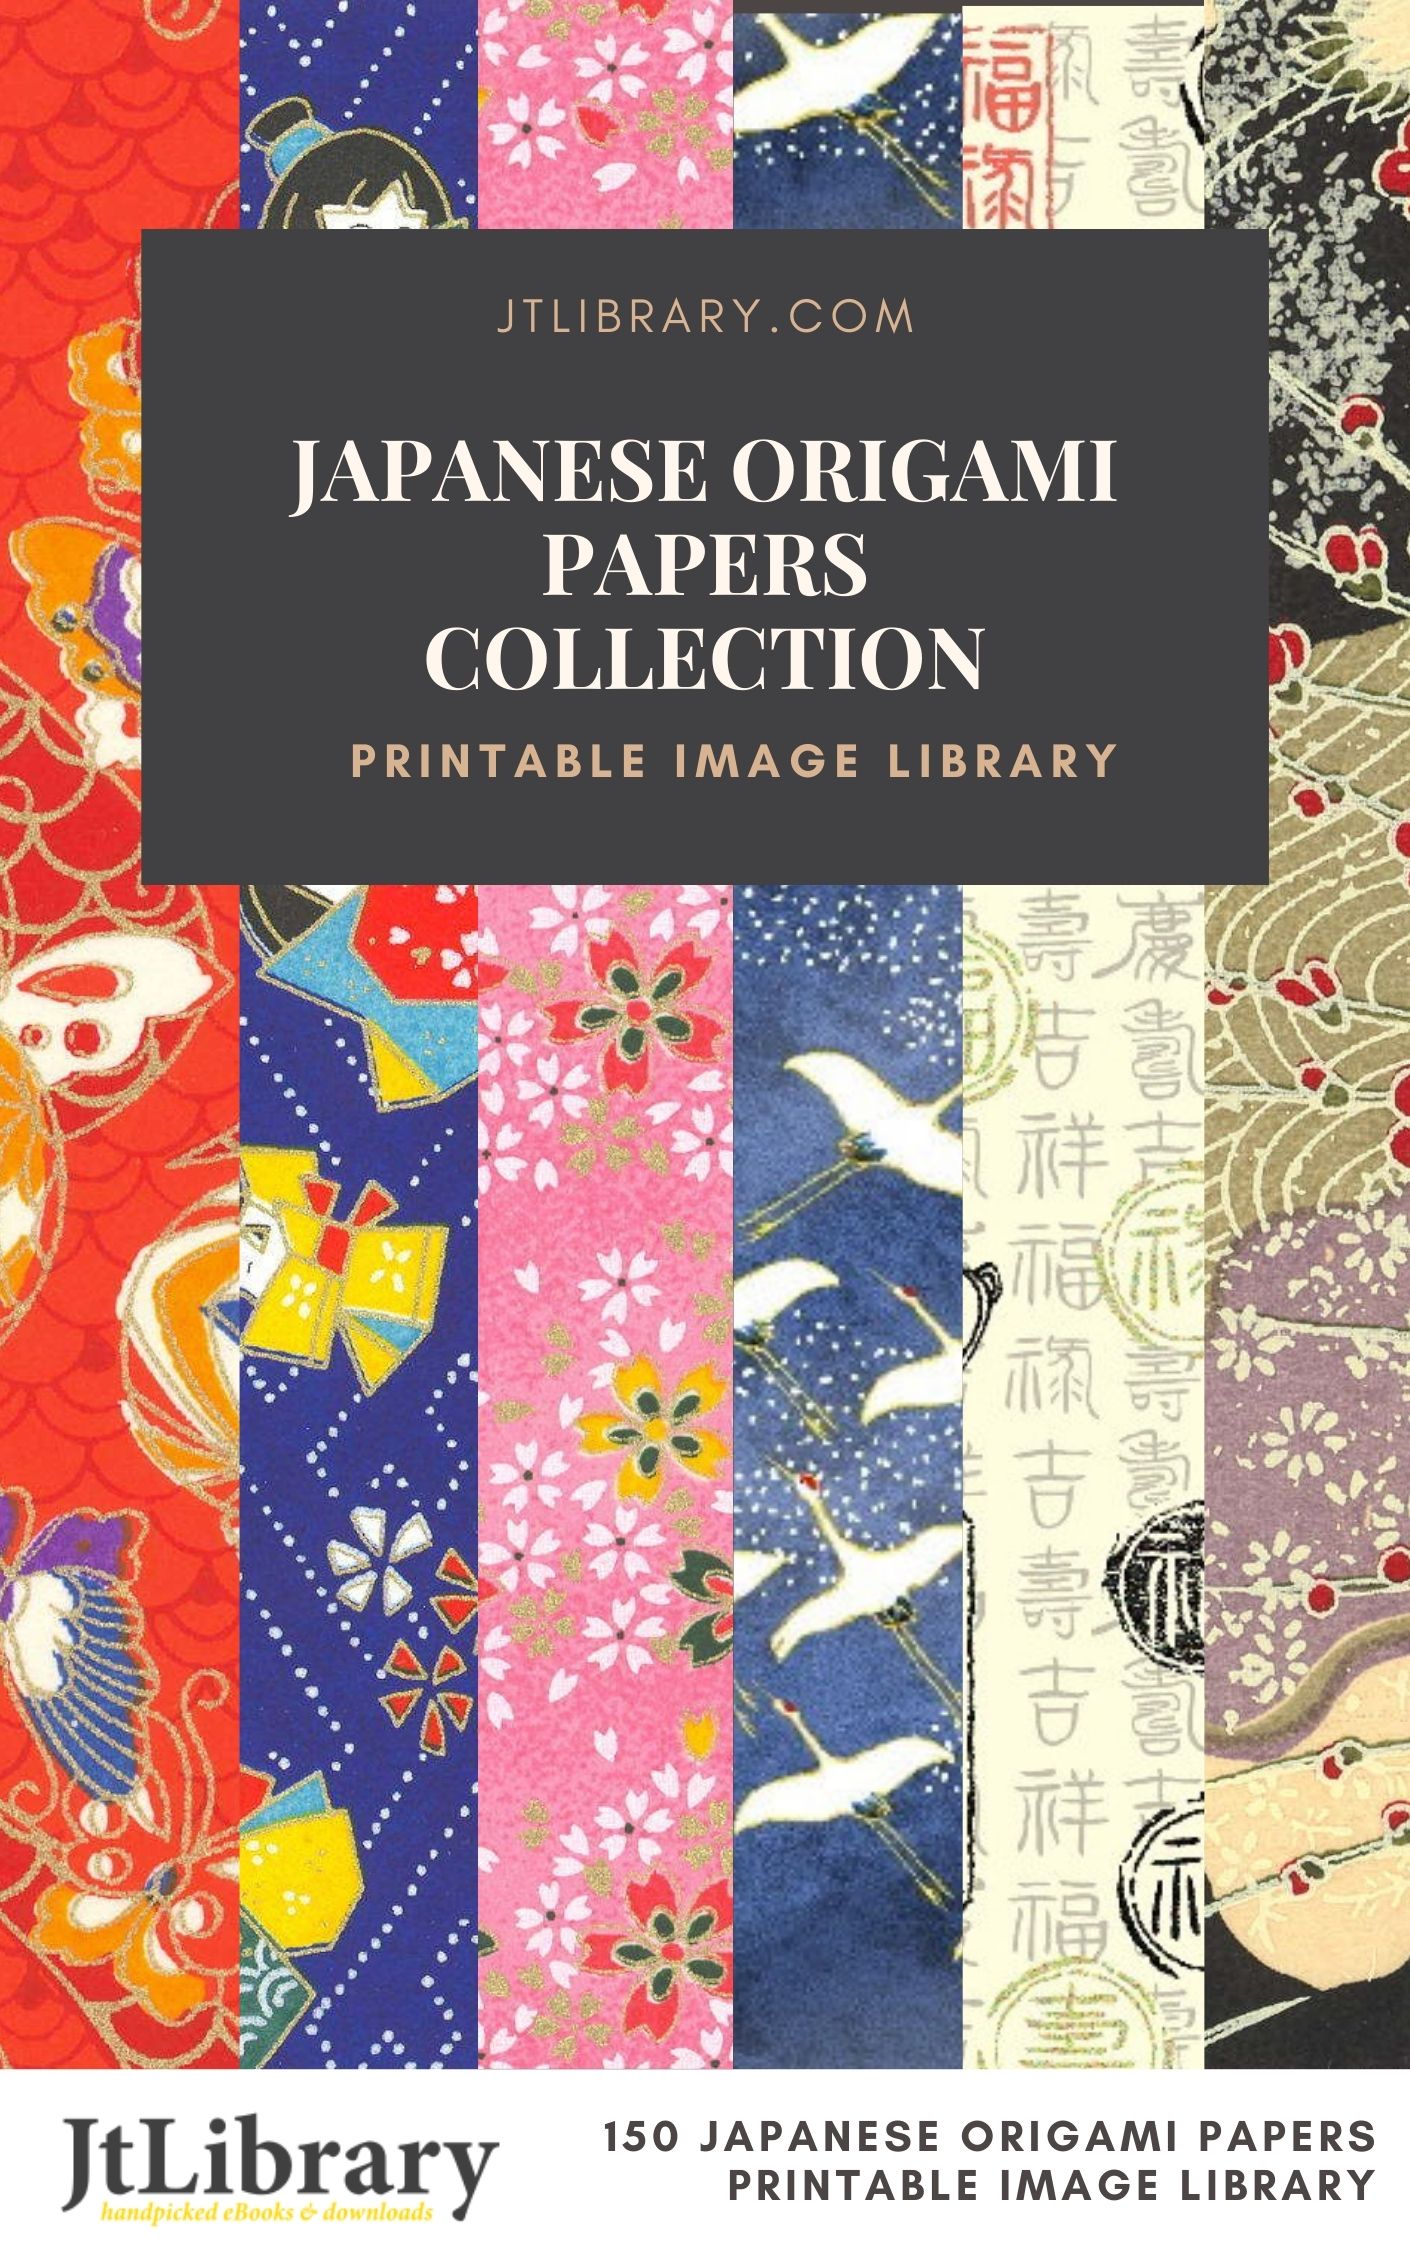 Japanese Origami Papers & Patterns Collection (Printable Image Library)